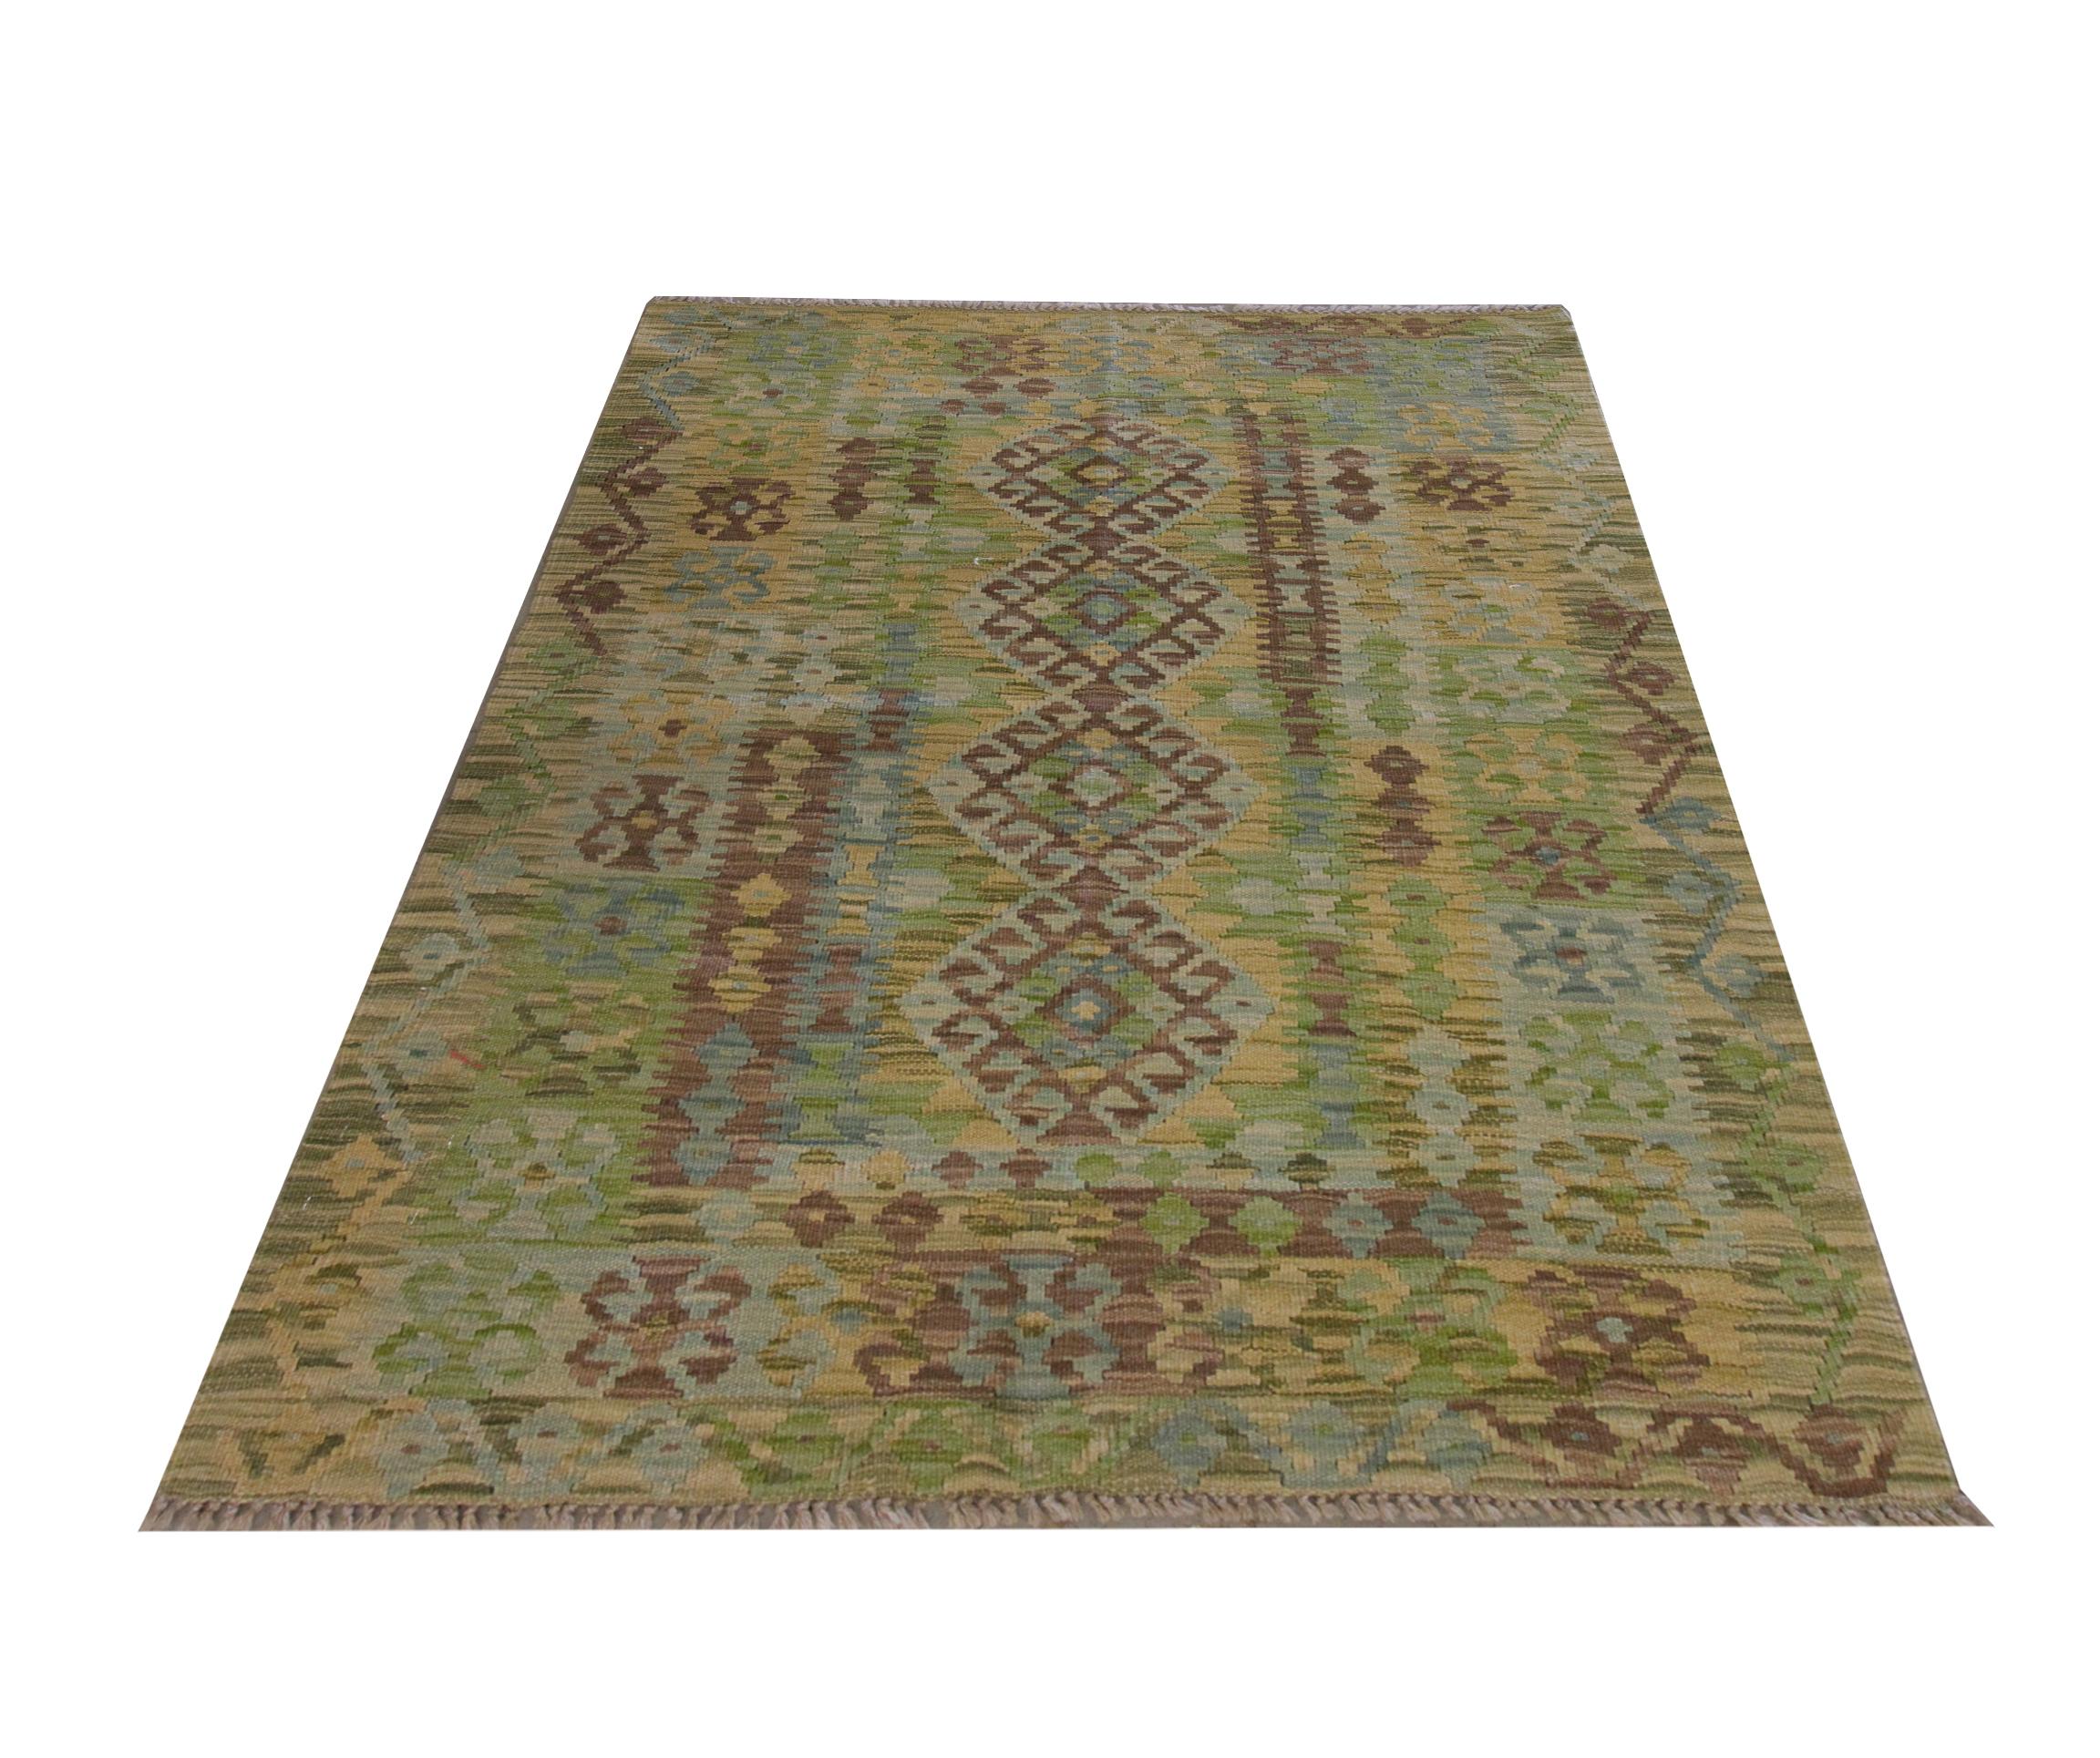 This luxurious green Kilim is a traditional afghan Kilim woven by hand in the early 21st century. Woven with a bold geometric pattern that features hook medallions and diamond motifs in accents of beige, blue and blue. The symmetrical design and